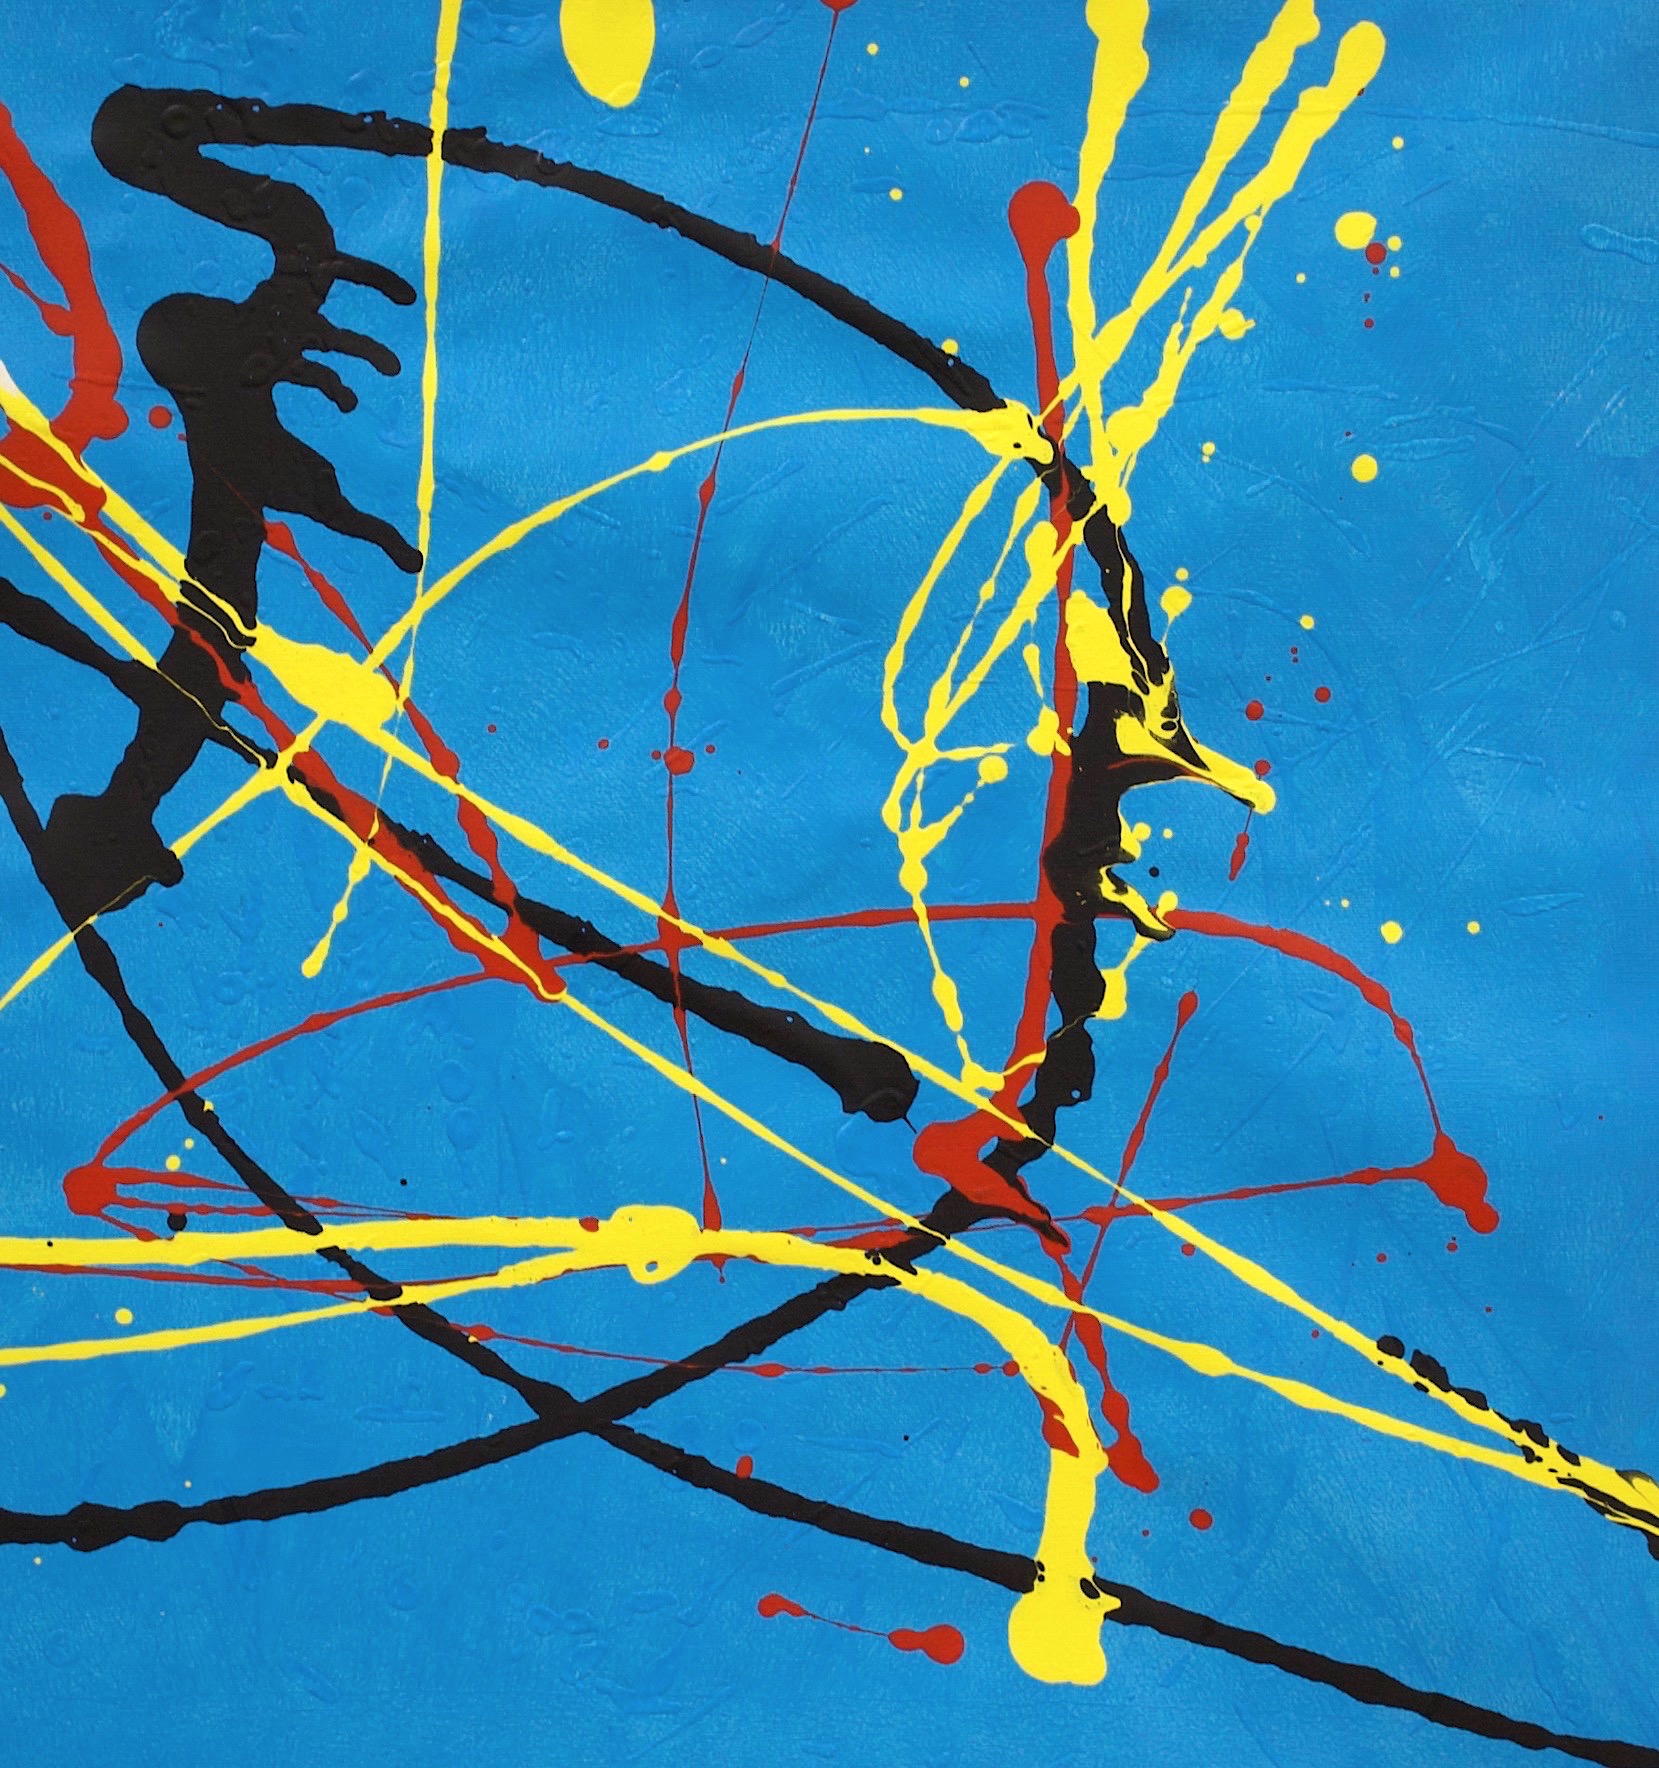 Red, black and yellow splatter on a blue background.